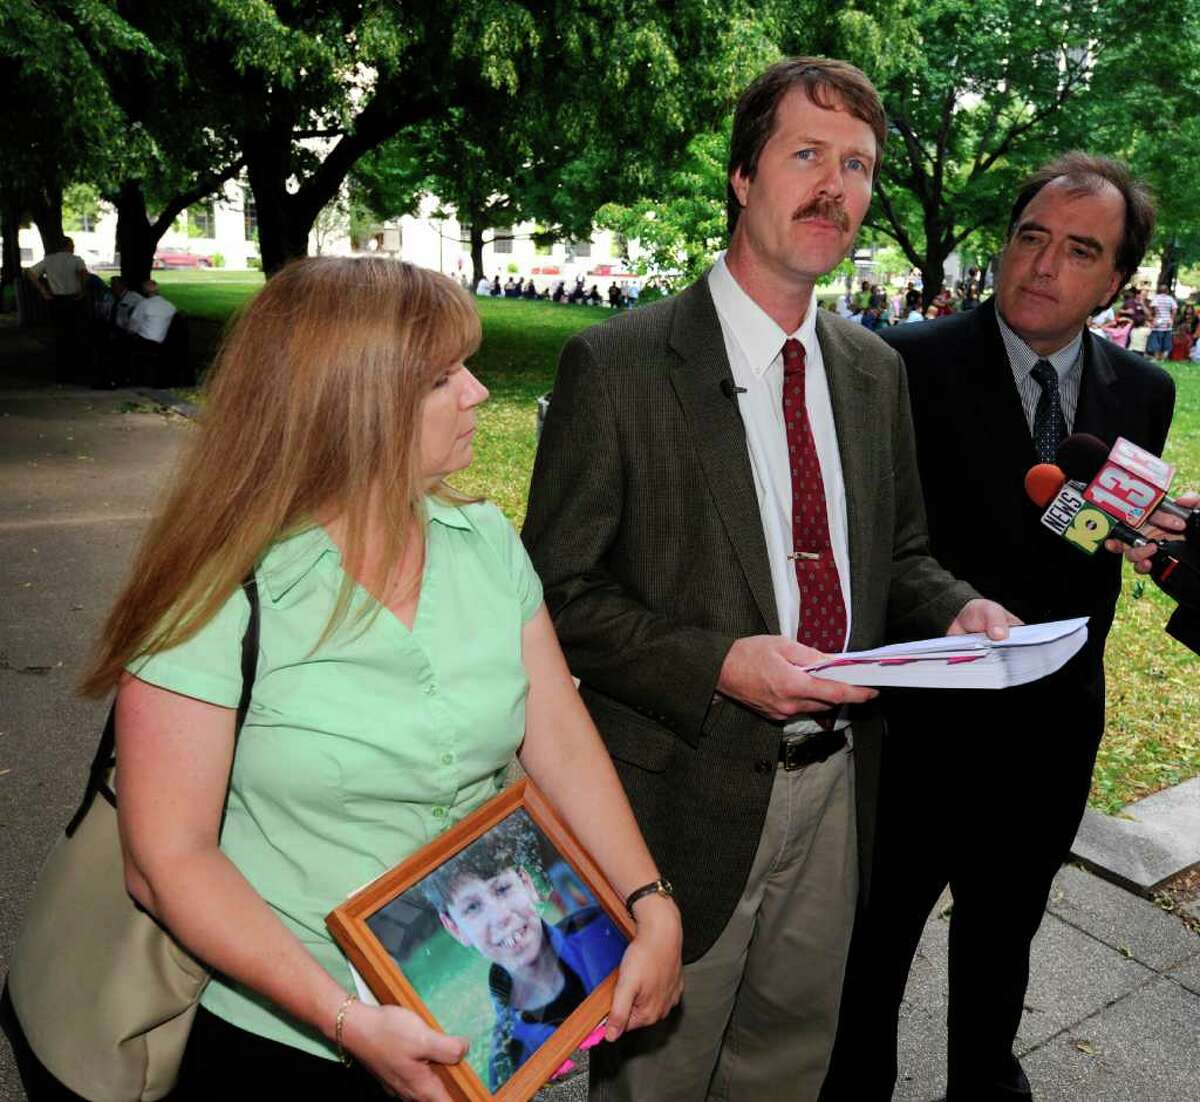 Michael and Lisa Carey demand reform of the mental health system in 2008. Michael Carey is the independent candidate running against incumbent state Sen. Neil Breslin and Republican Bob Domenici. (Skip Dickstein / Times Union)